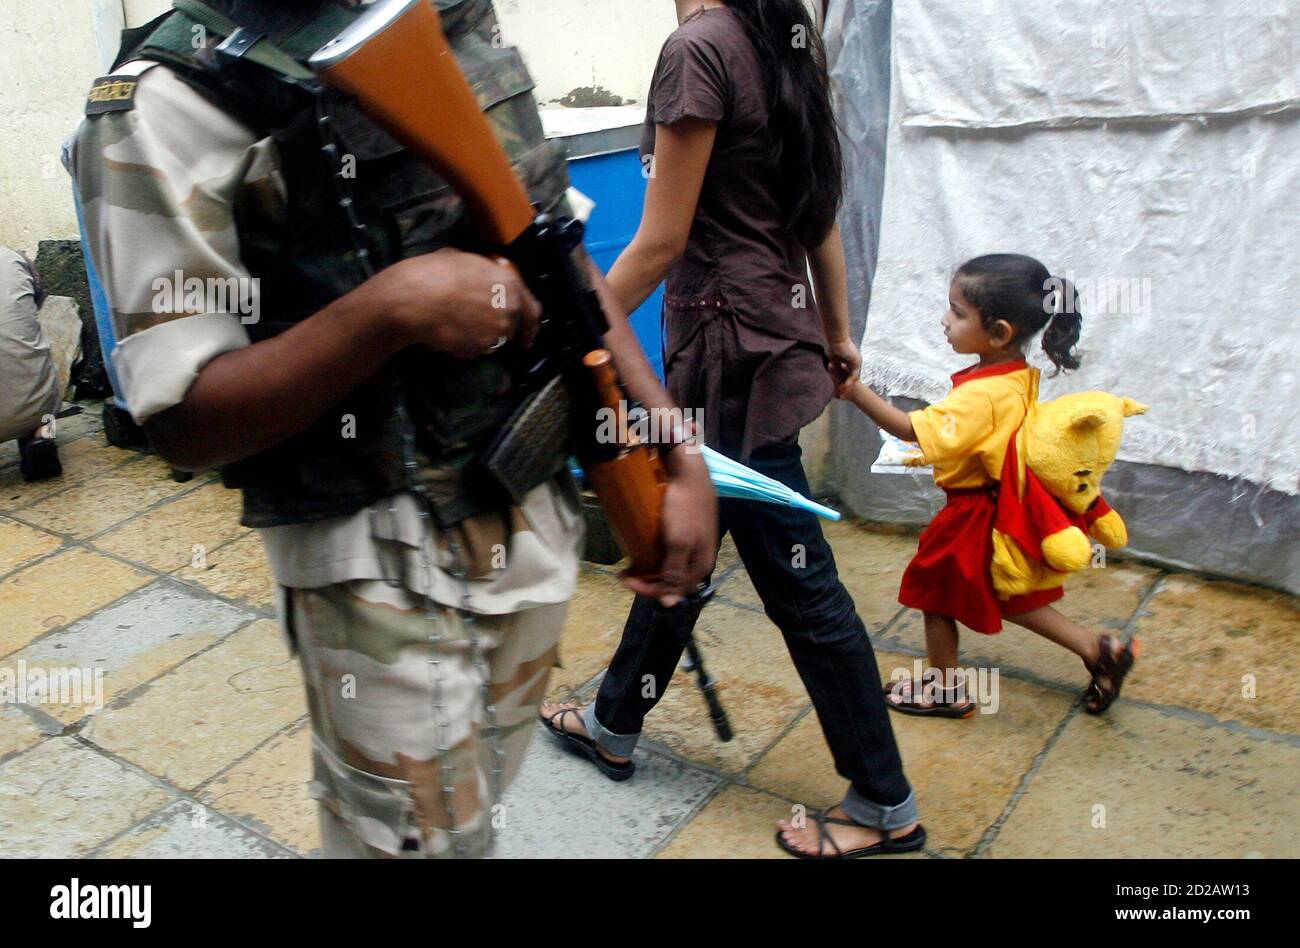 Paramilitary troops patrol a residential area around Arthur Road Jail,  where Mohammad Ajmal Kasab, the lone surviving gunman of the Mumbai attacks  is being held, in Mumbai July 20, 2009. Kasab made